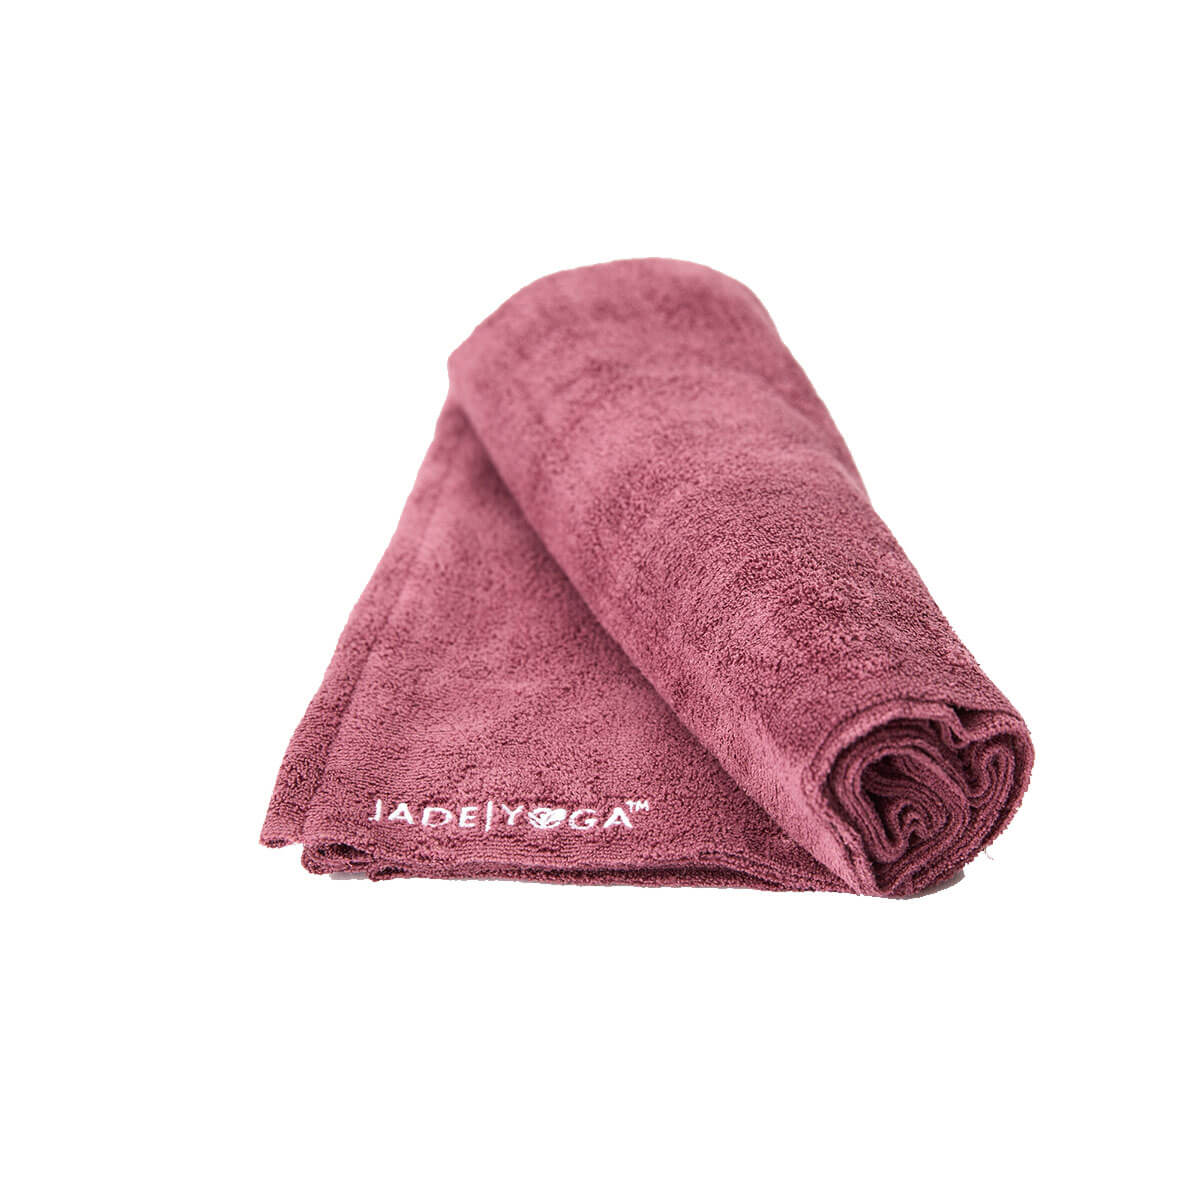 Best Yoga Towel - Soft, Lightweight and Great Grip